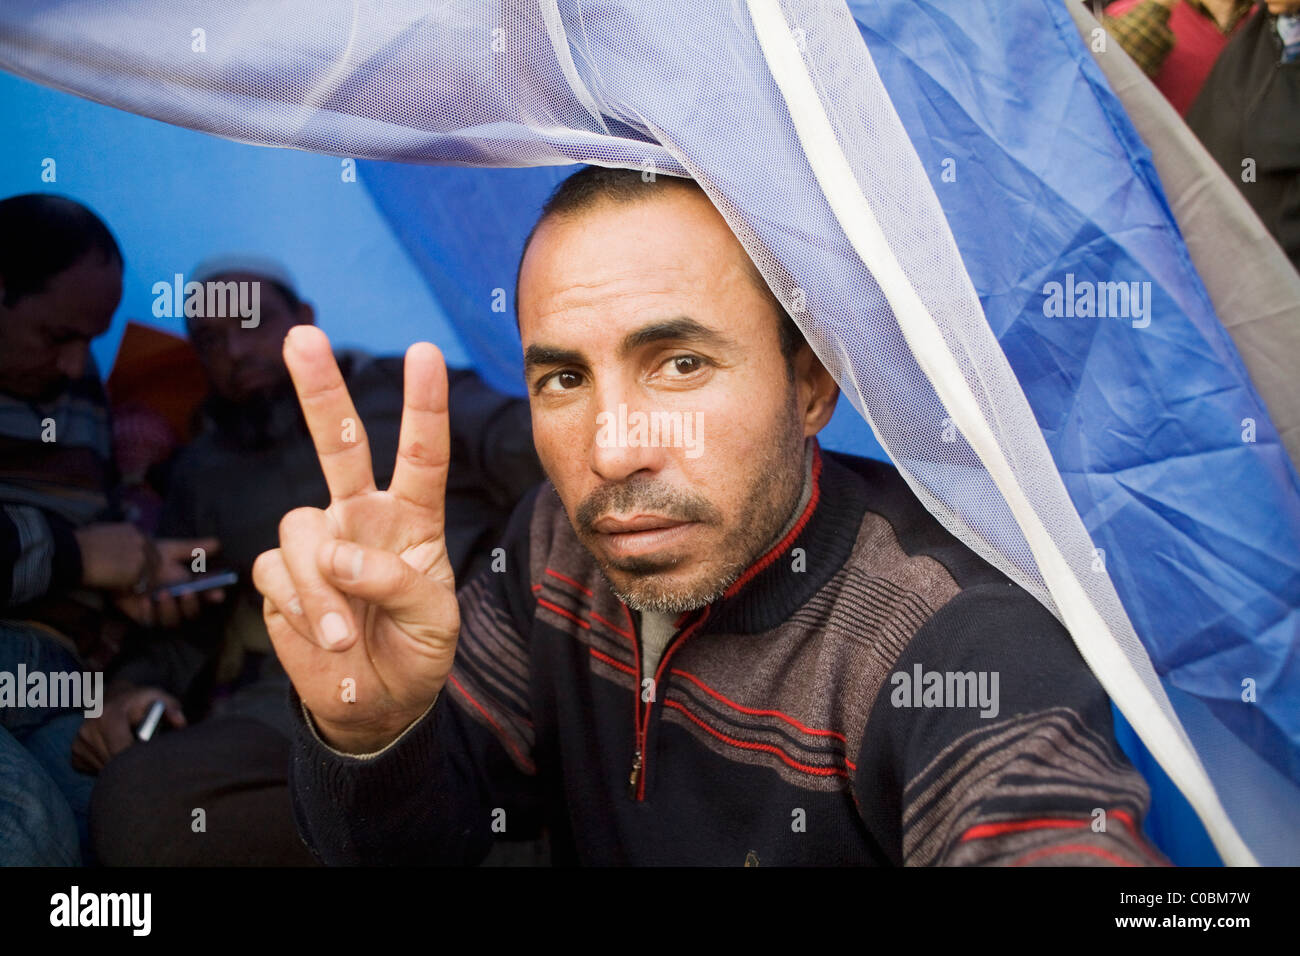 A man in a tent gives the peace sign in Tahrir Square hours before President Mubarak steps down from office on Feb.11, 2011 Stock Photo